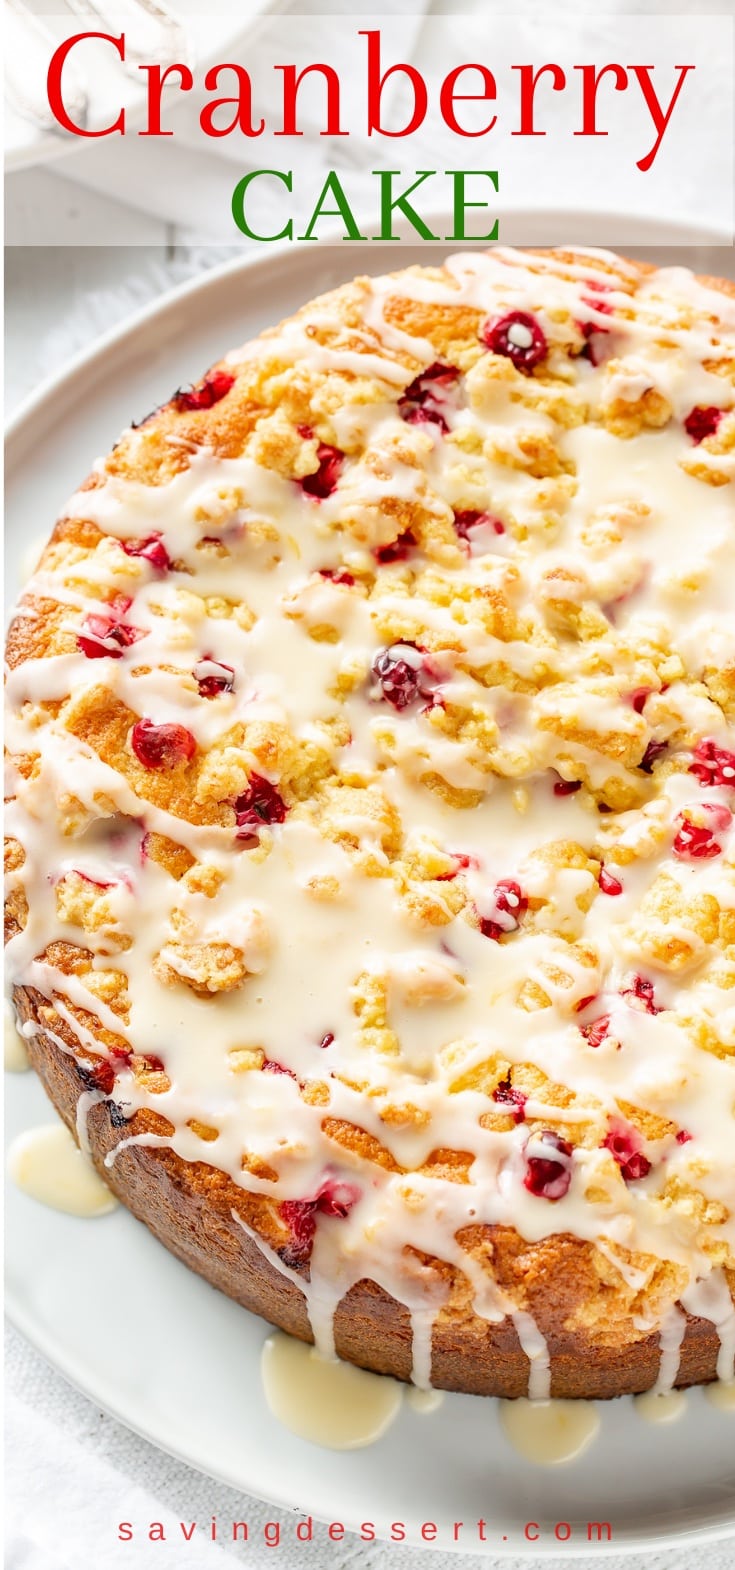 An overhead view of a cranberry cake with a crumble top drizzled with an orange glaze